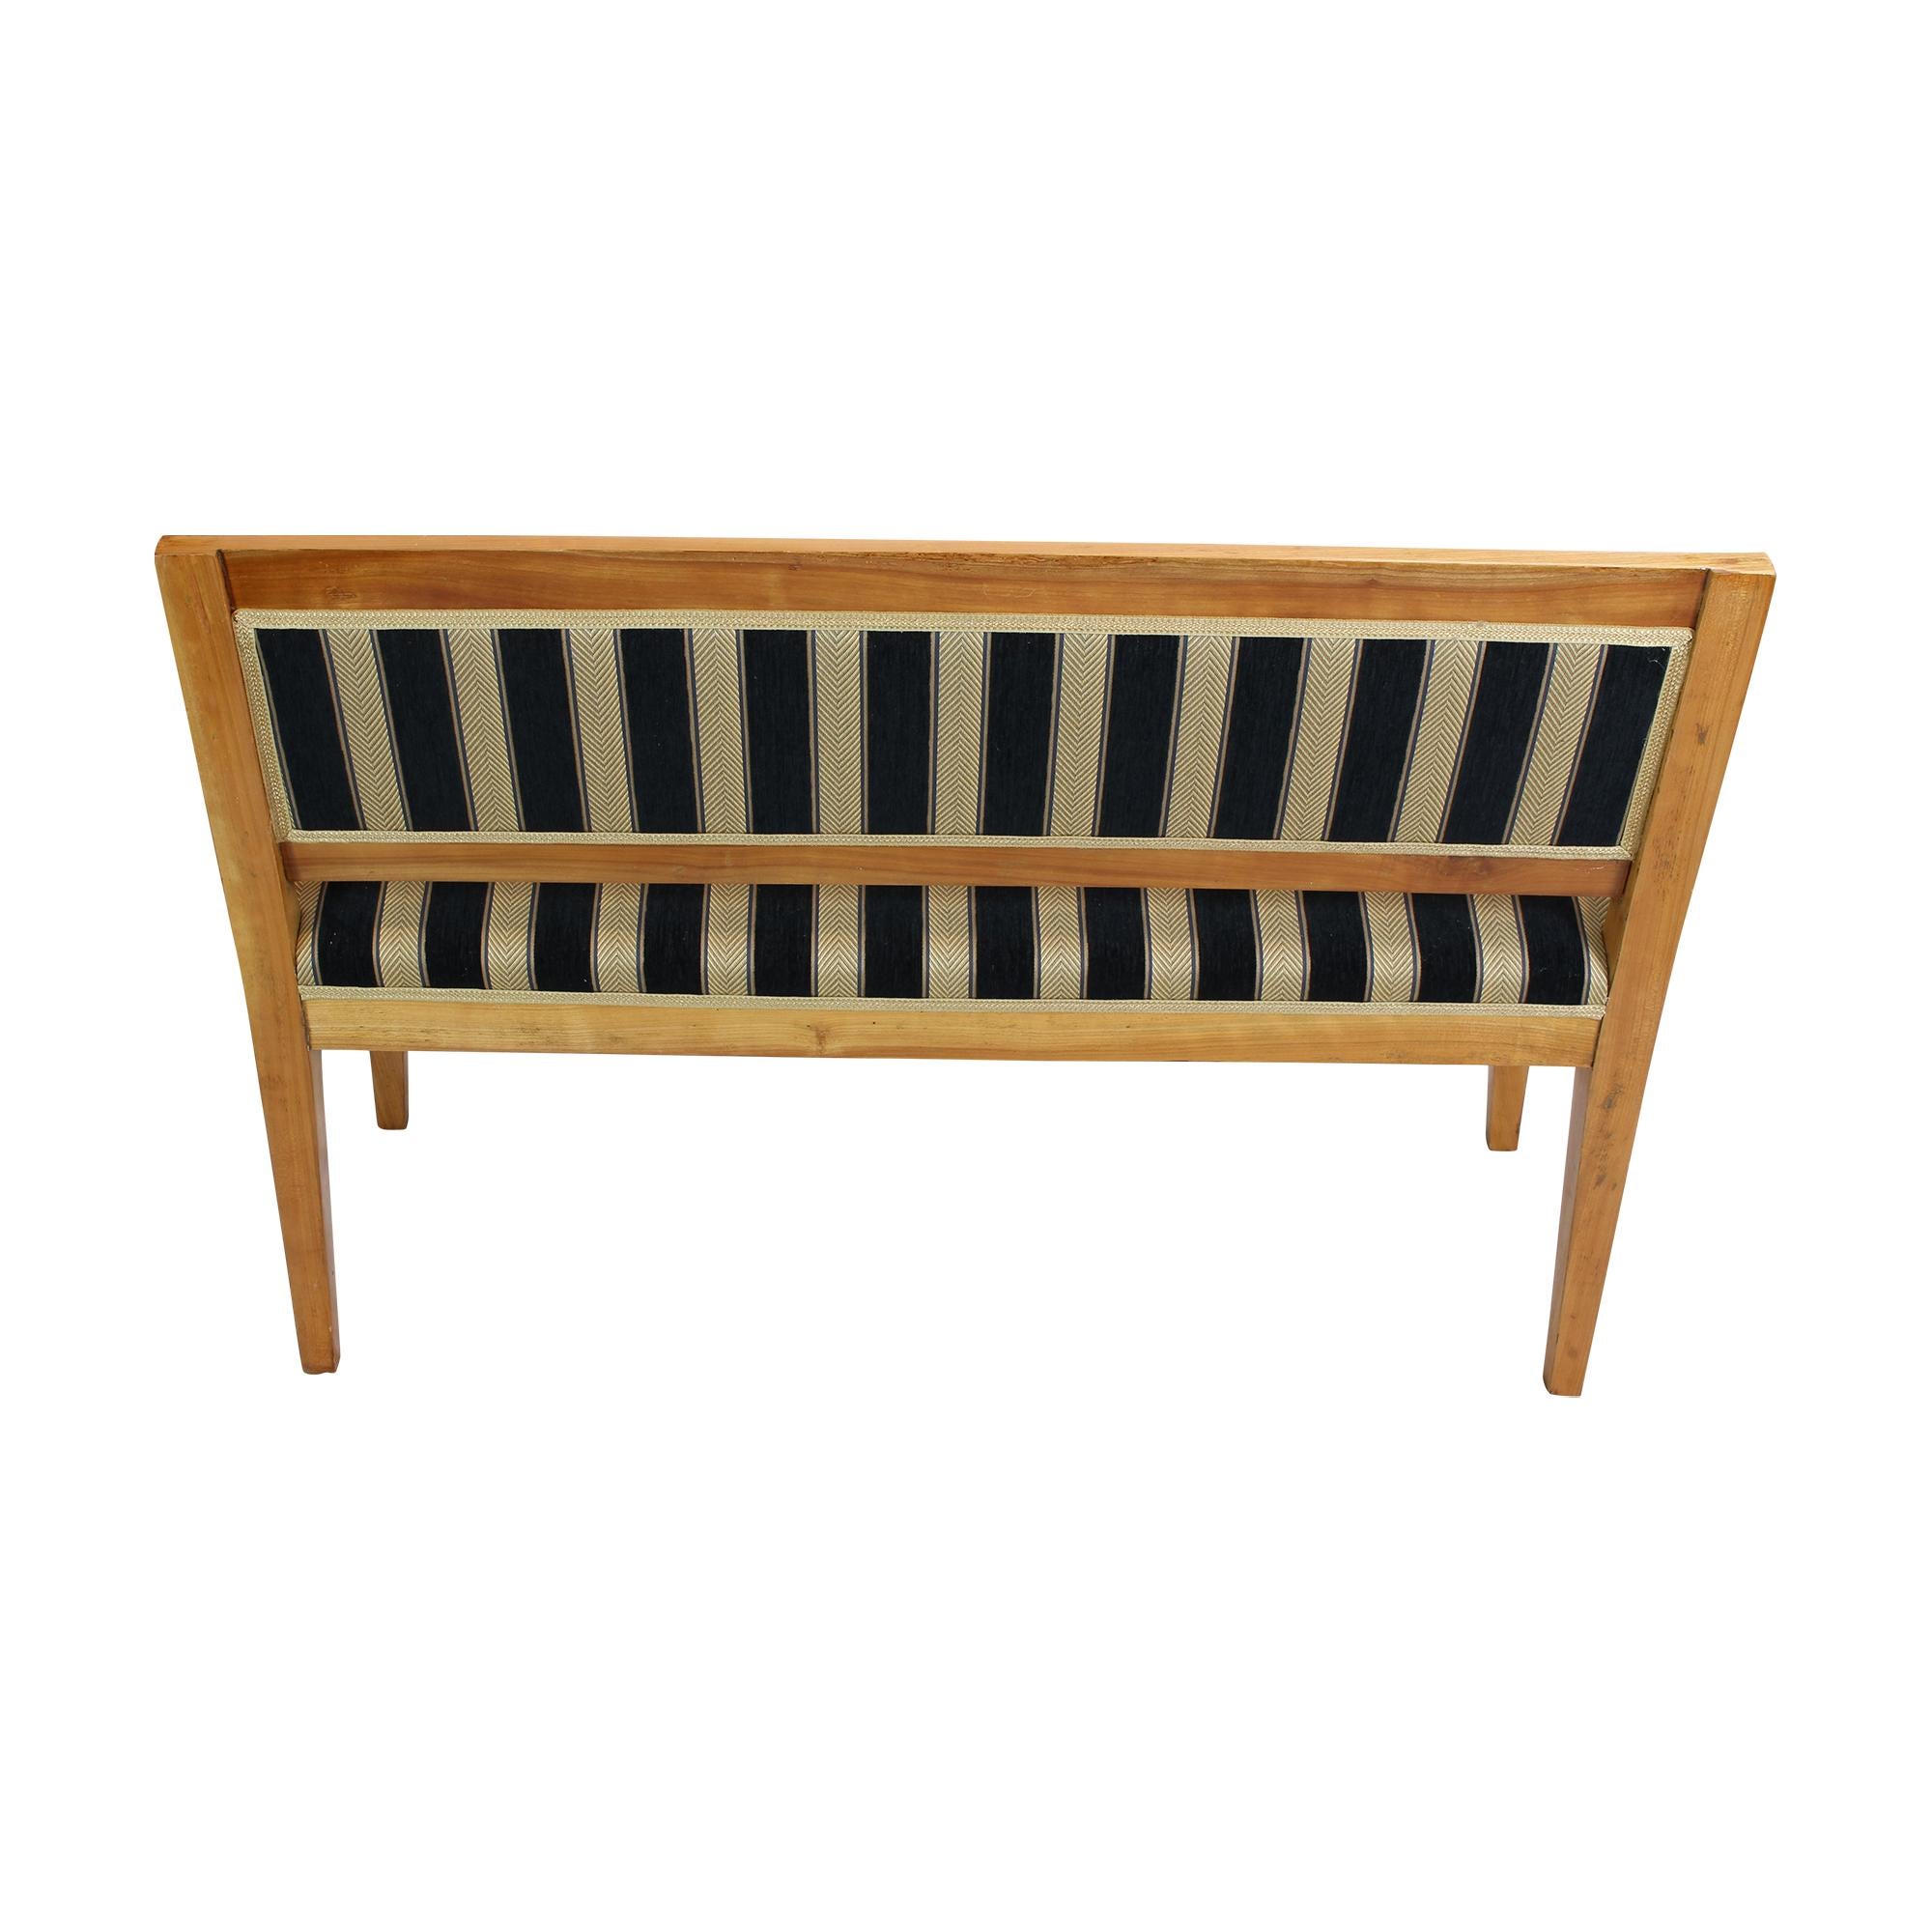 Polished 19th Century Biedermeier Small Cherry Bench Seat  For Sale